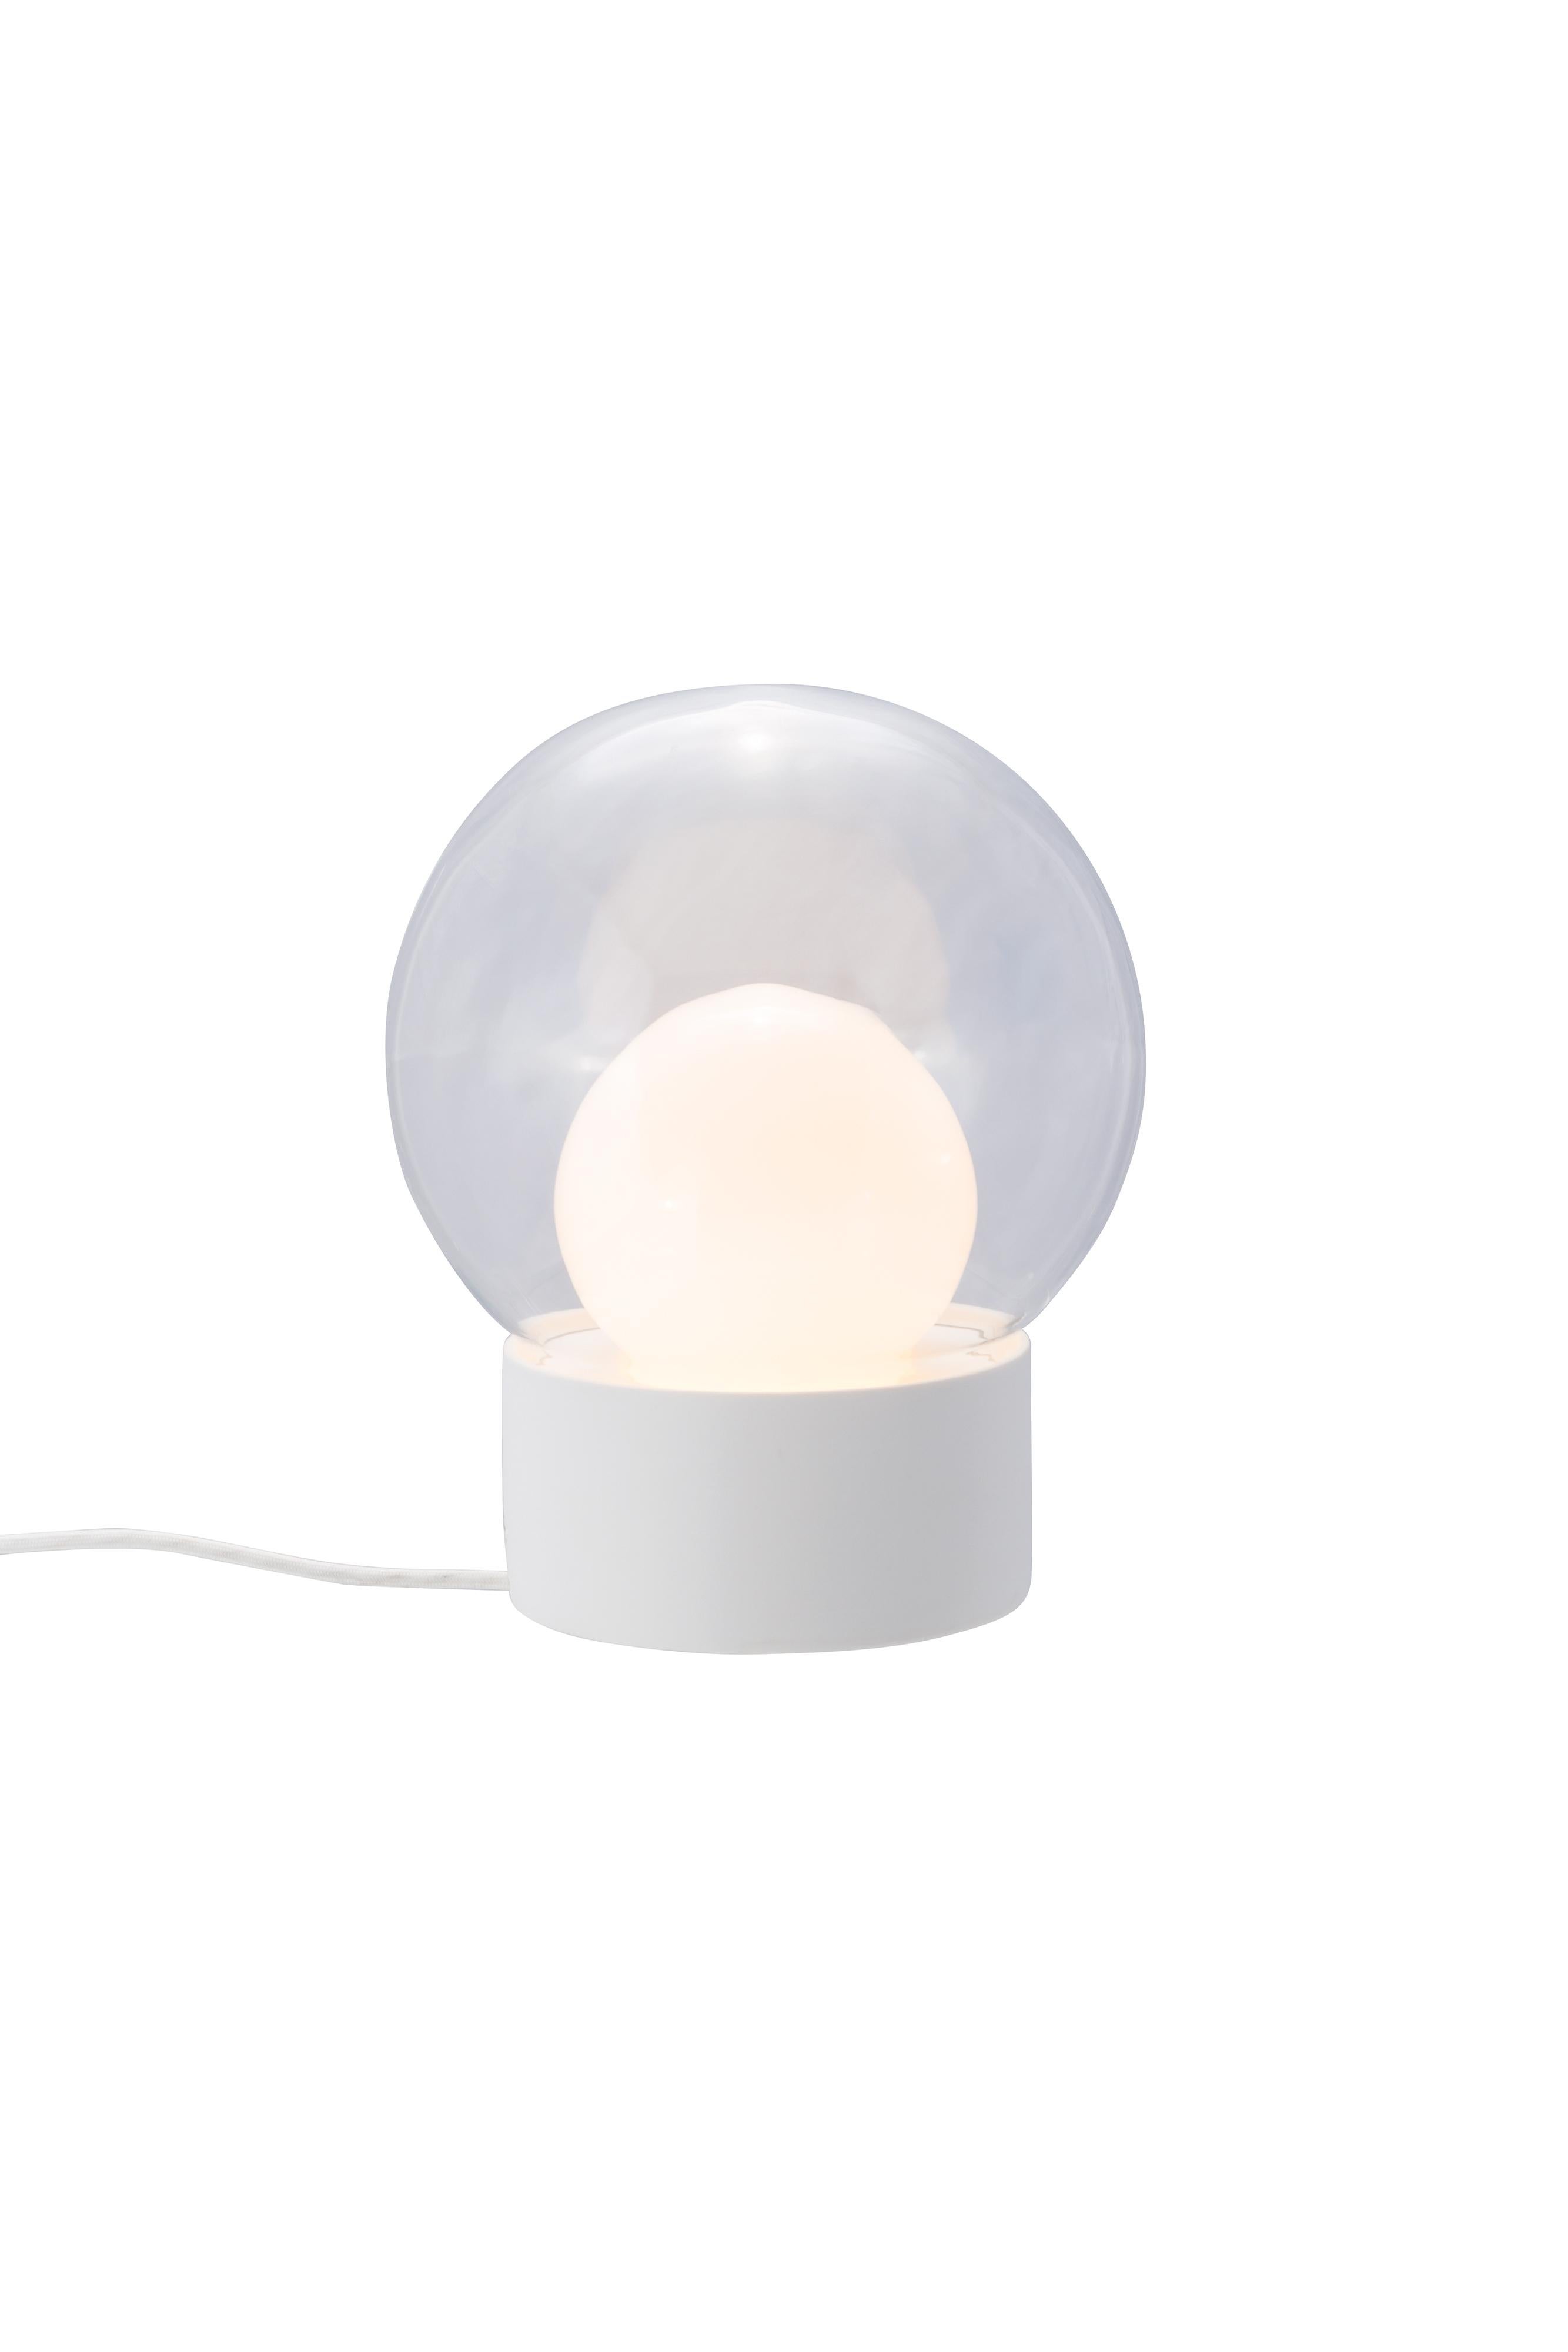 German Boule Small Transparent Smoky Grey White Table Lamp by Pulpo